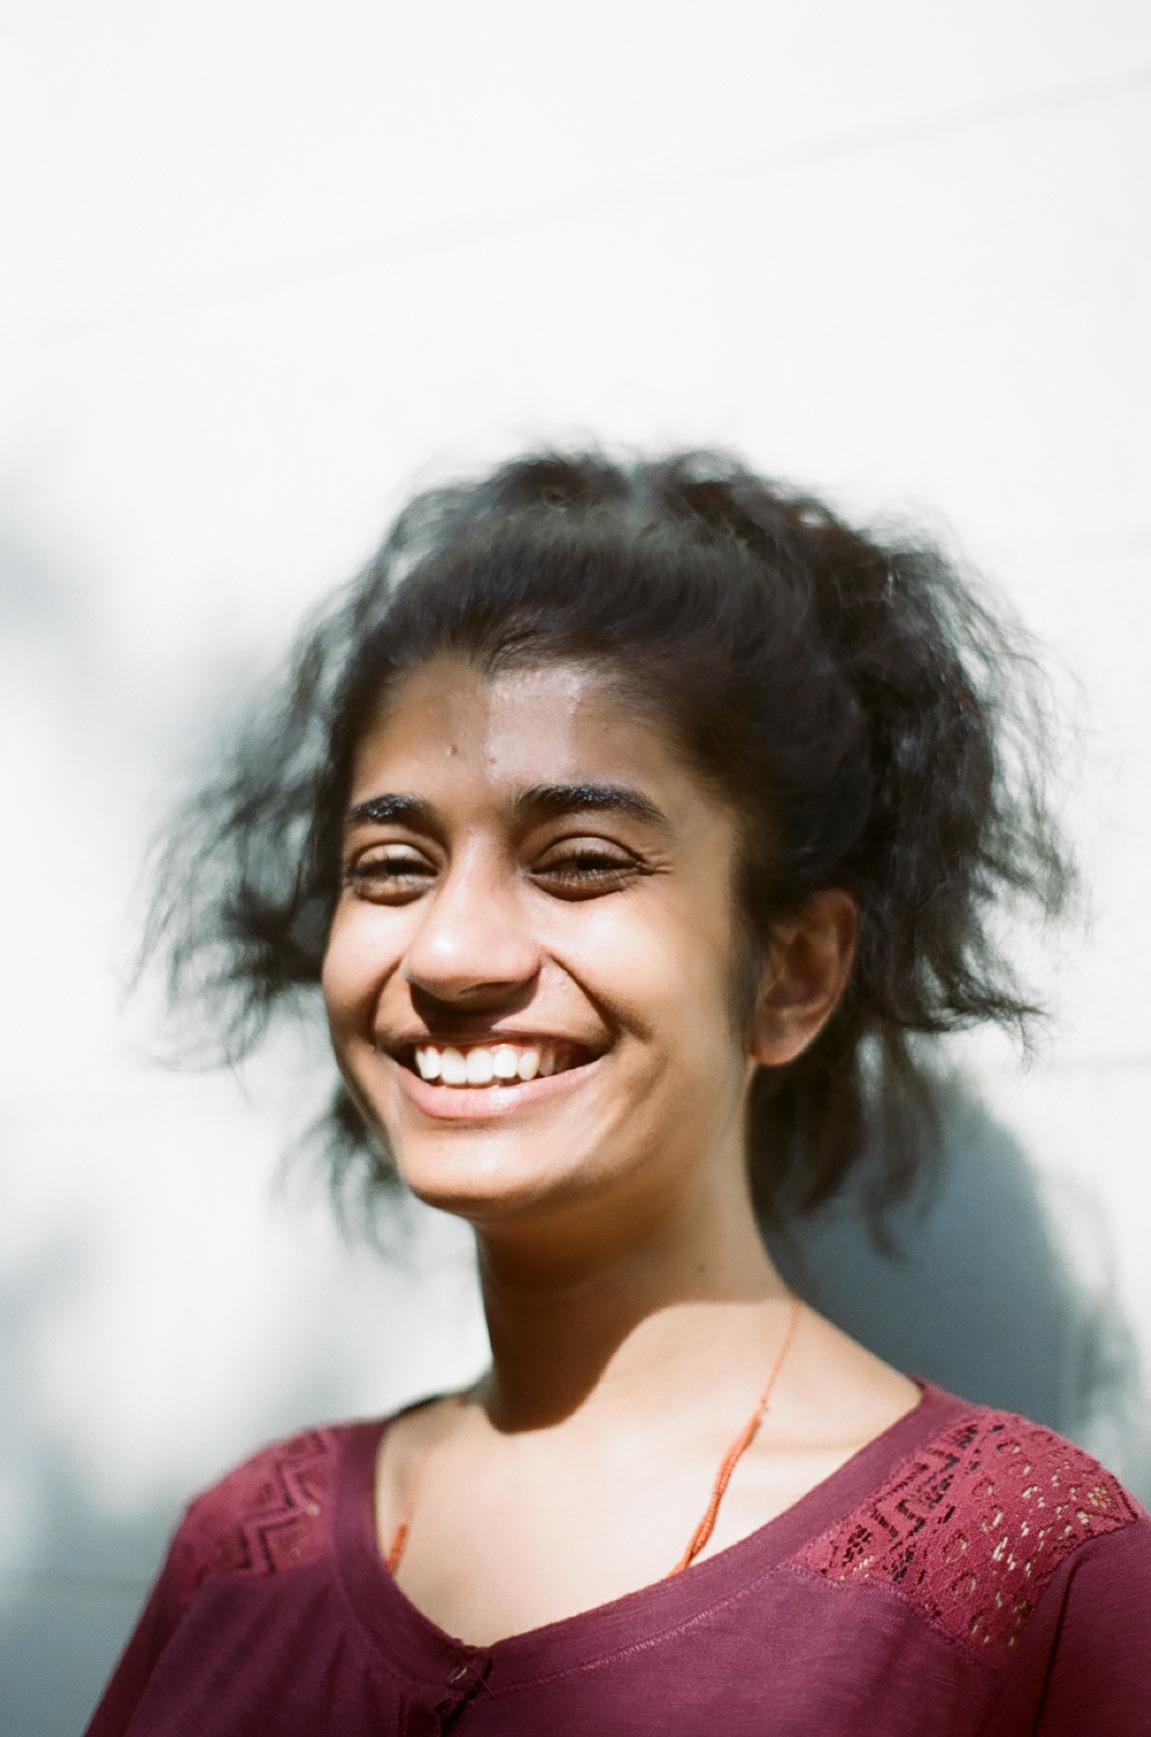 Photo portrait of young woman who is a person of colour, smiling with a maroon blouse.